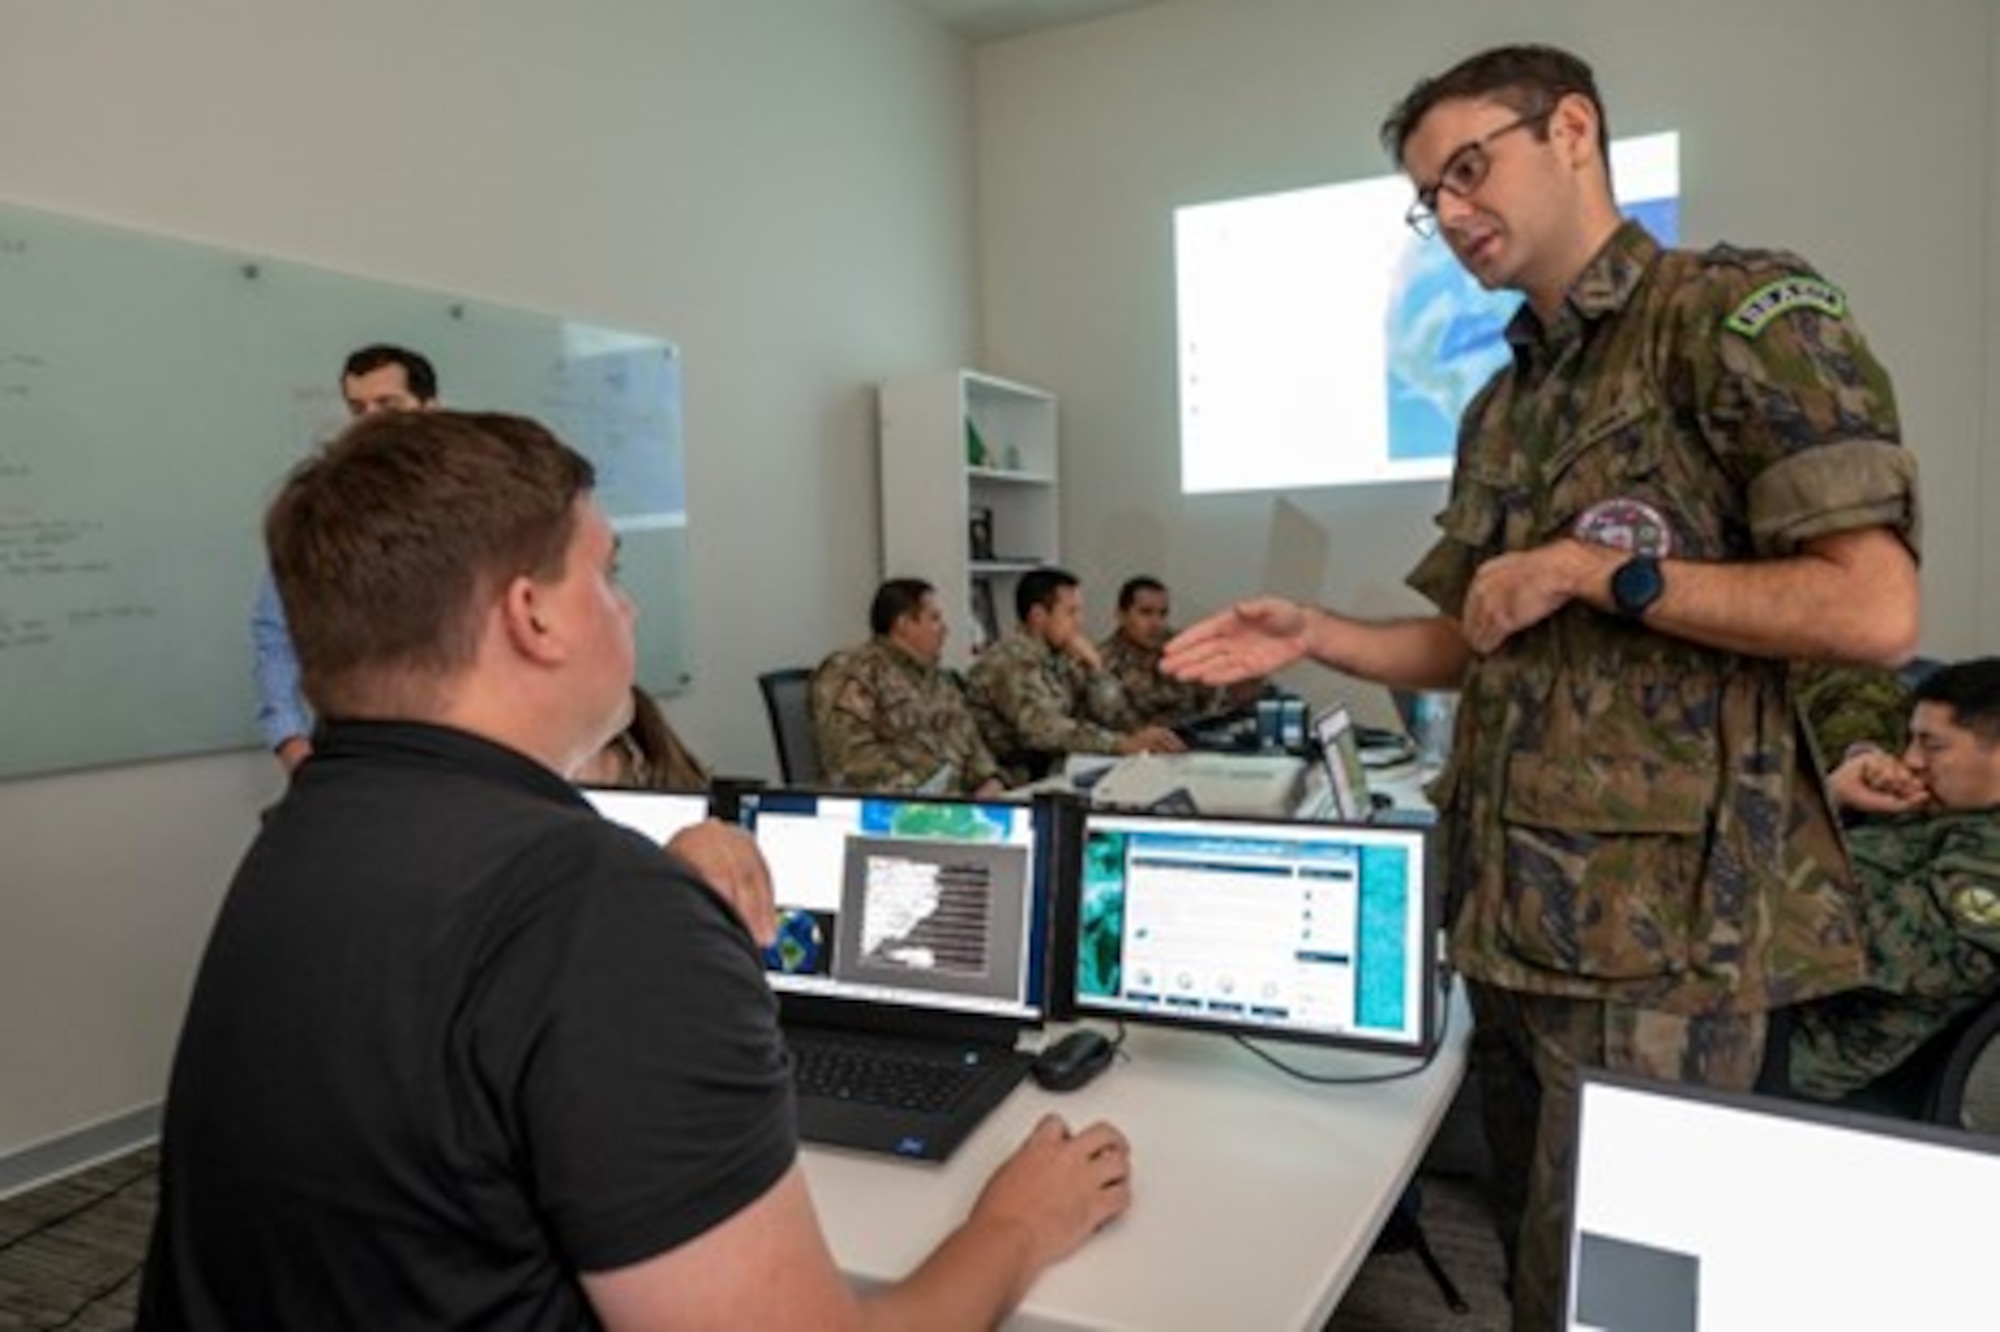 Space Systems Command Surveillance, Reconnaissance and Tracking (SRT) team member Adam Woodard shows Lt. Fabio Rocha Brazil, how to determine the best sensor type to use while the SRT team builds Operational Planning Products. Photo credit: SSgt Matthew Matlock